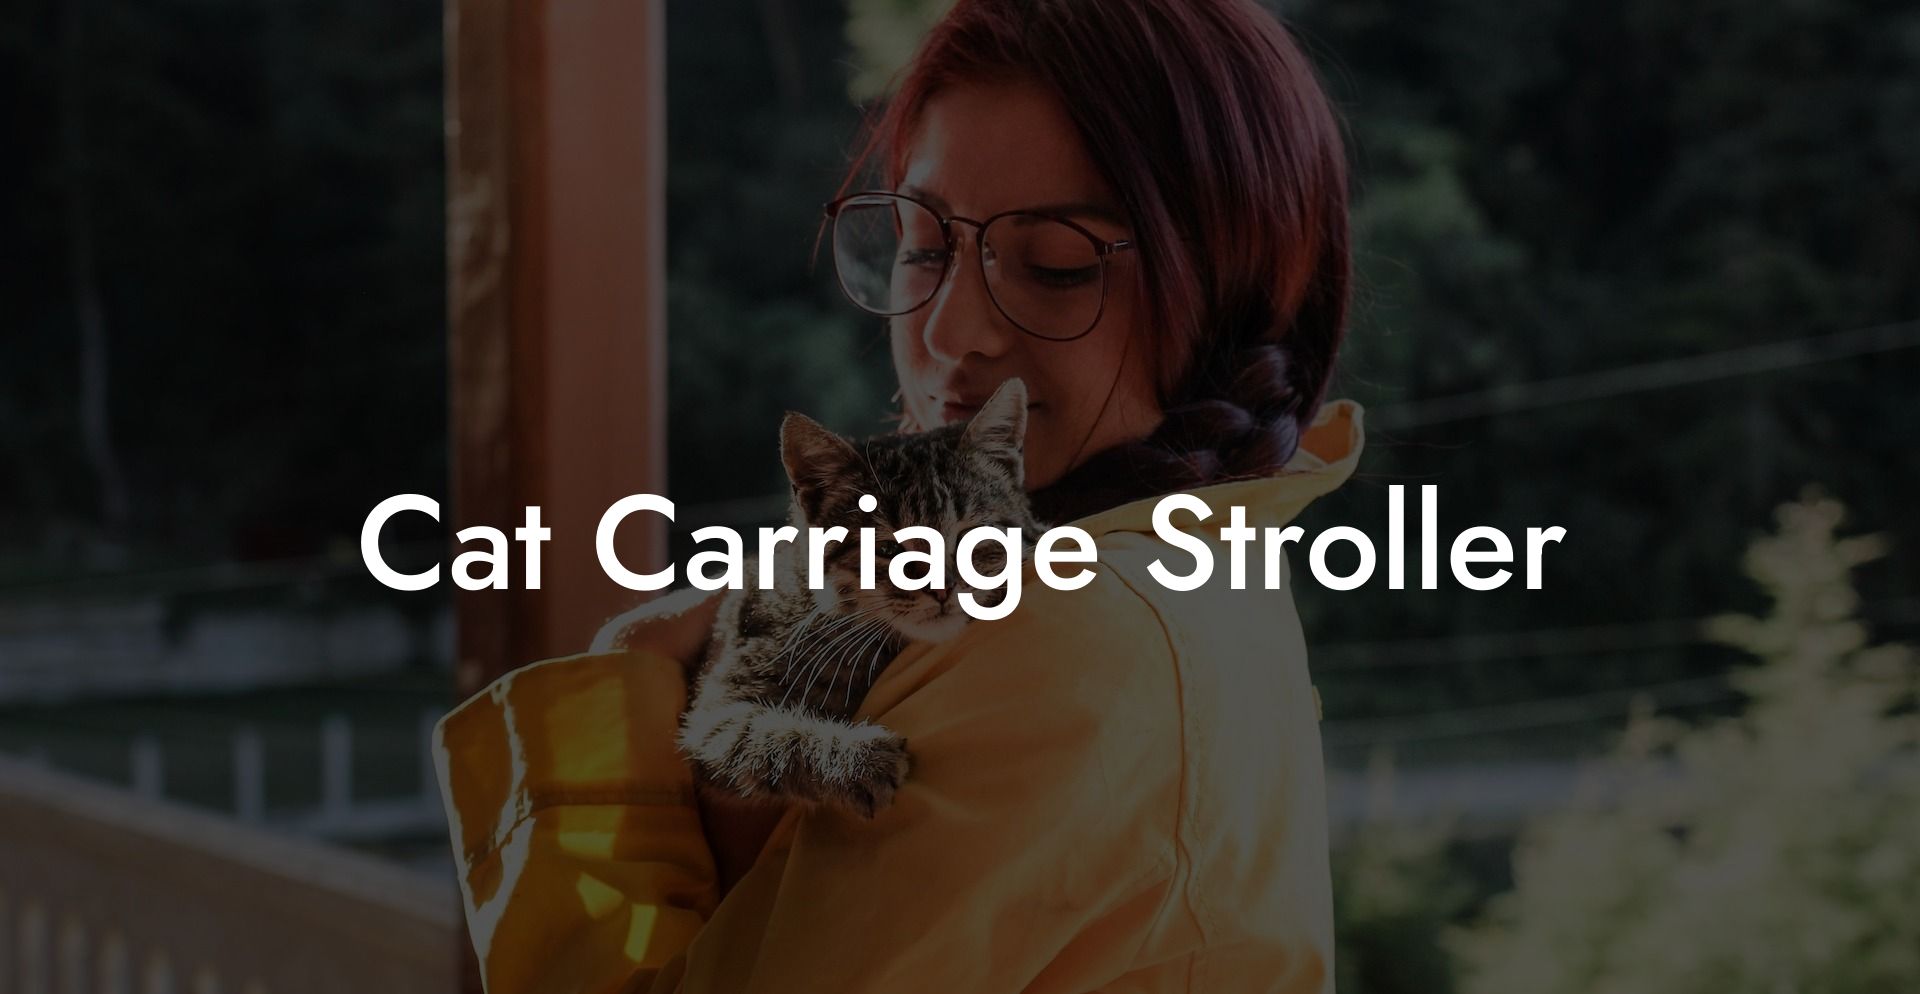 Cat Carriage Stroller